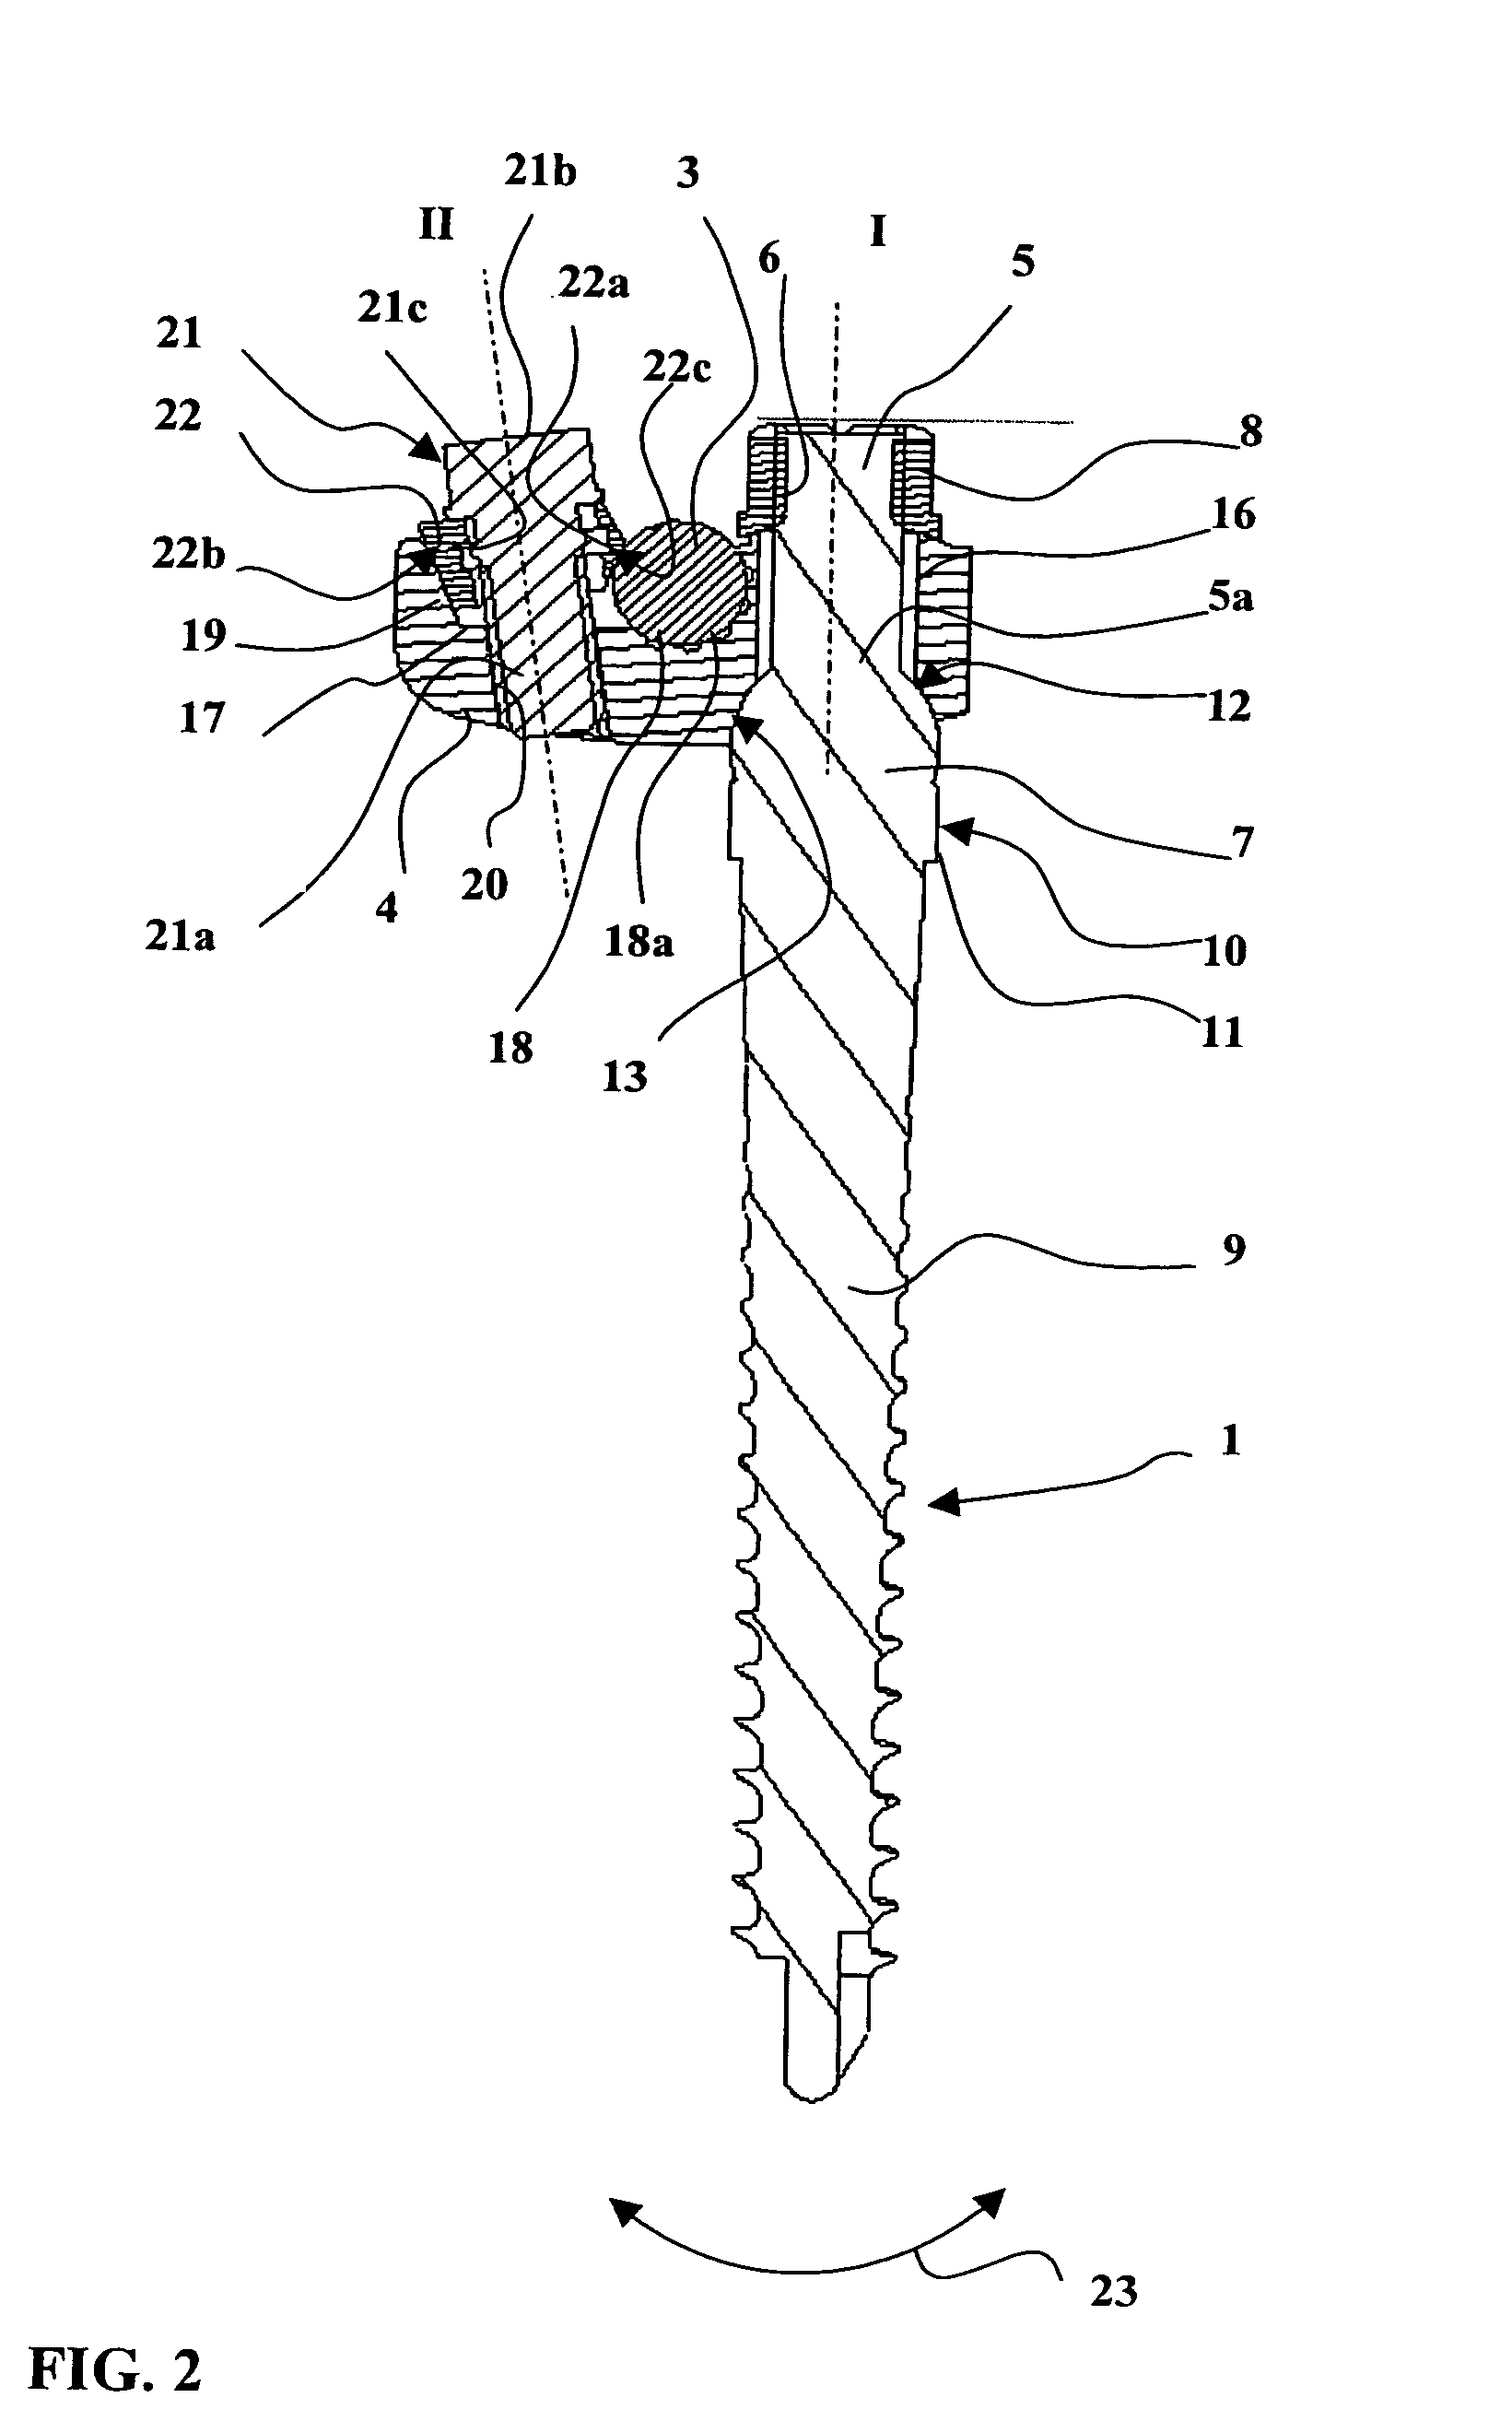 Vertebral column support device which is assembled by means of clamping